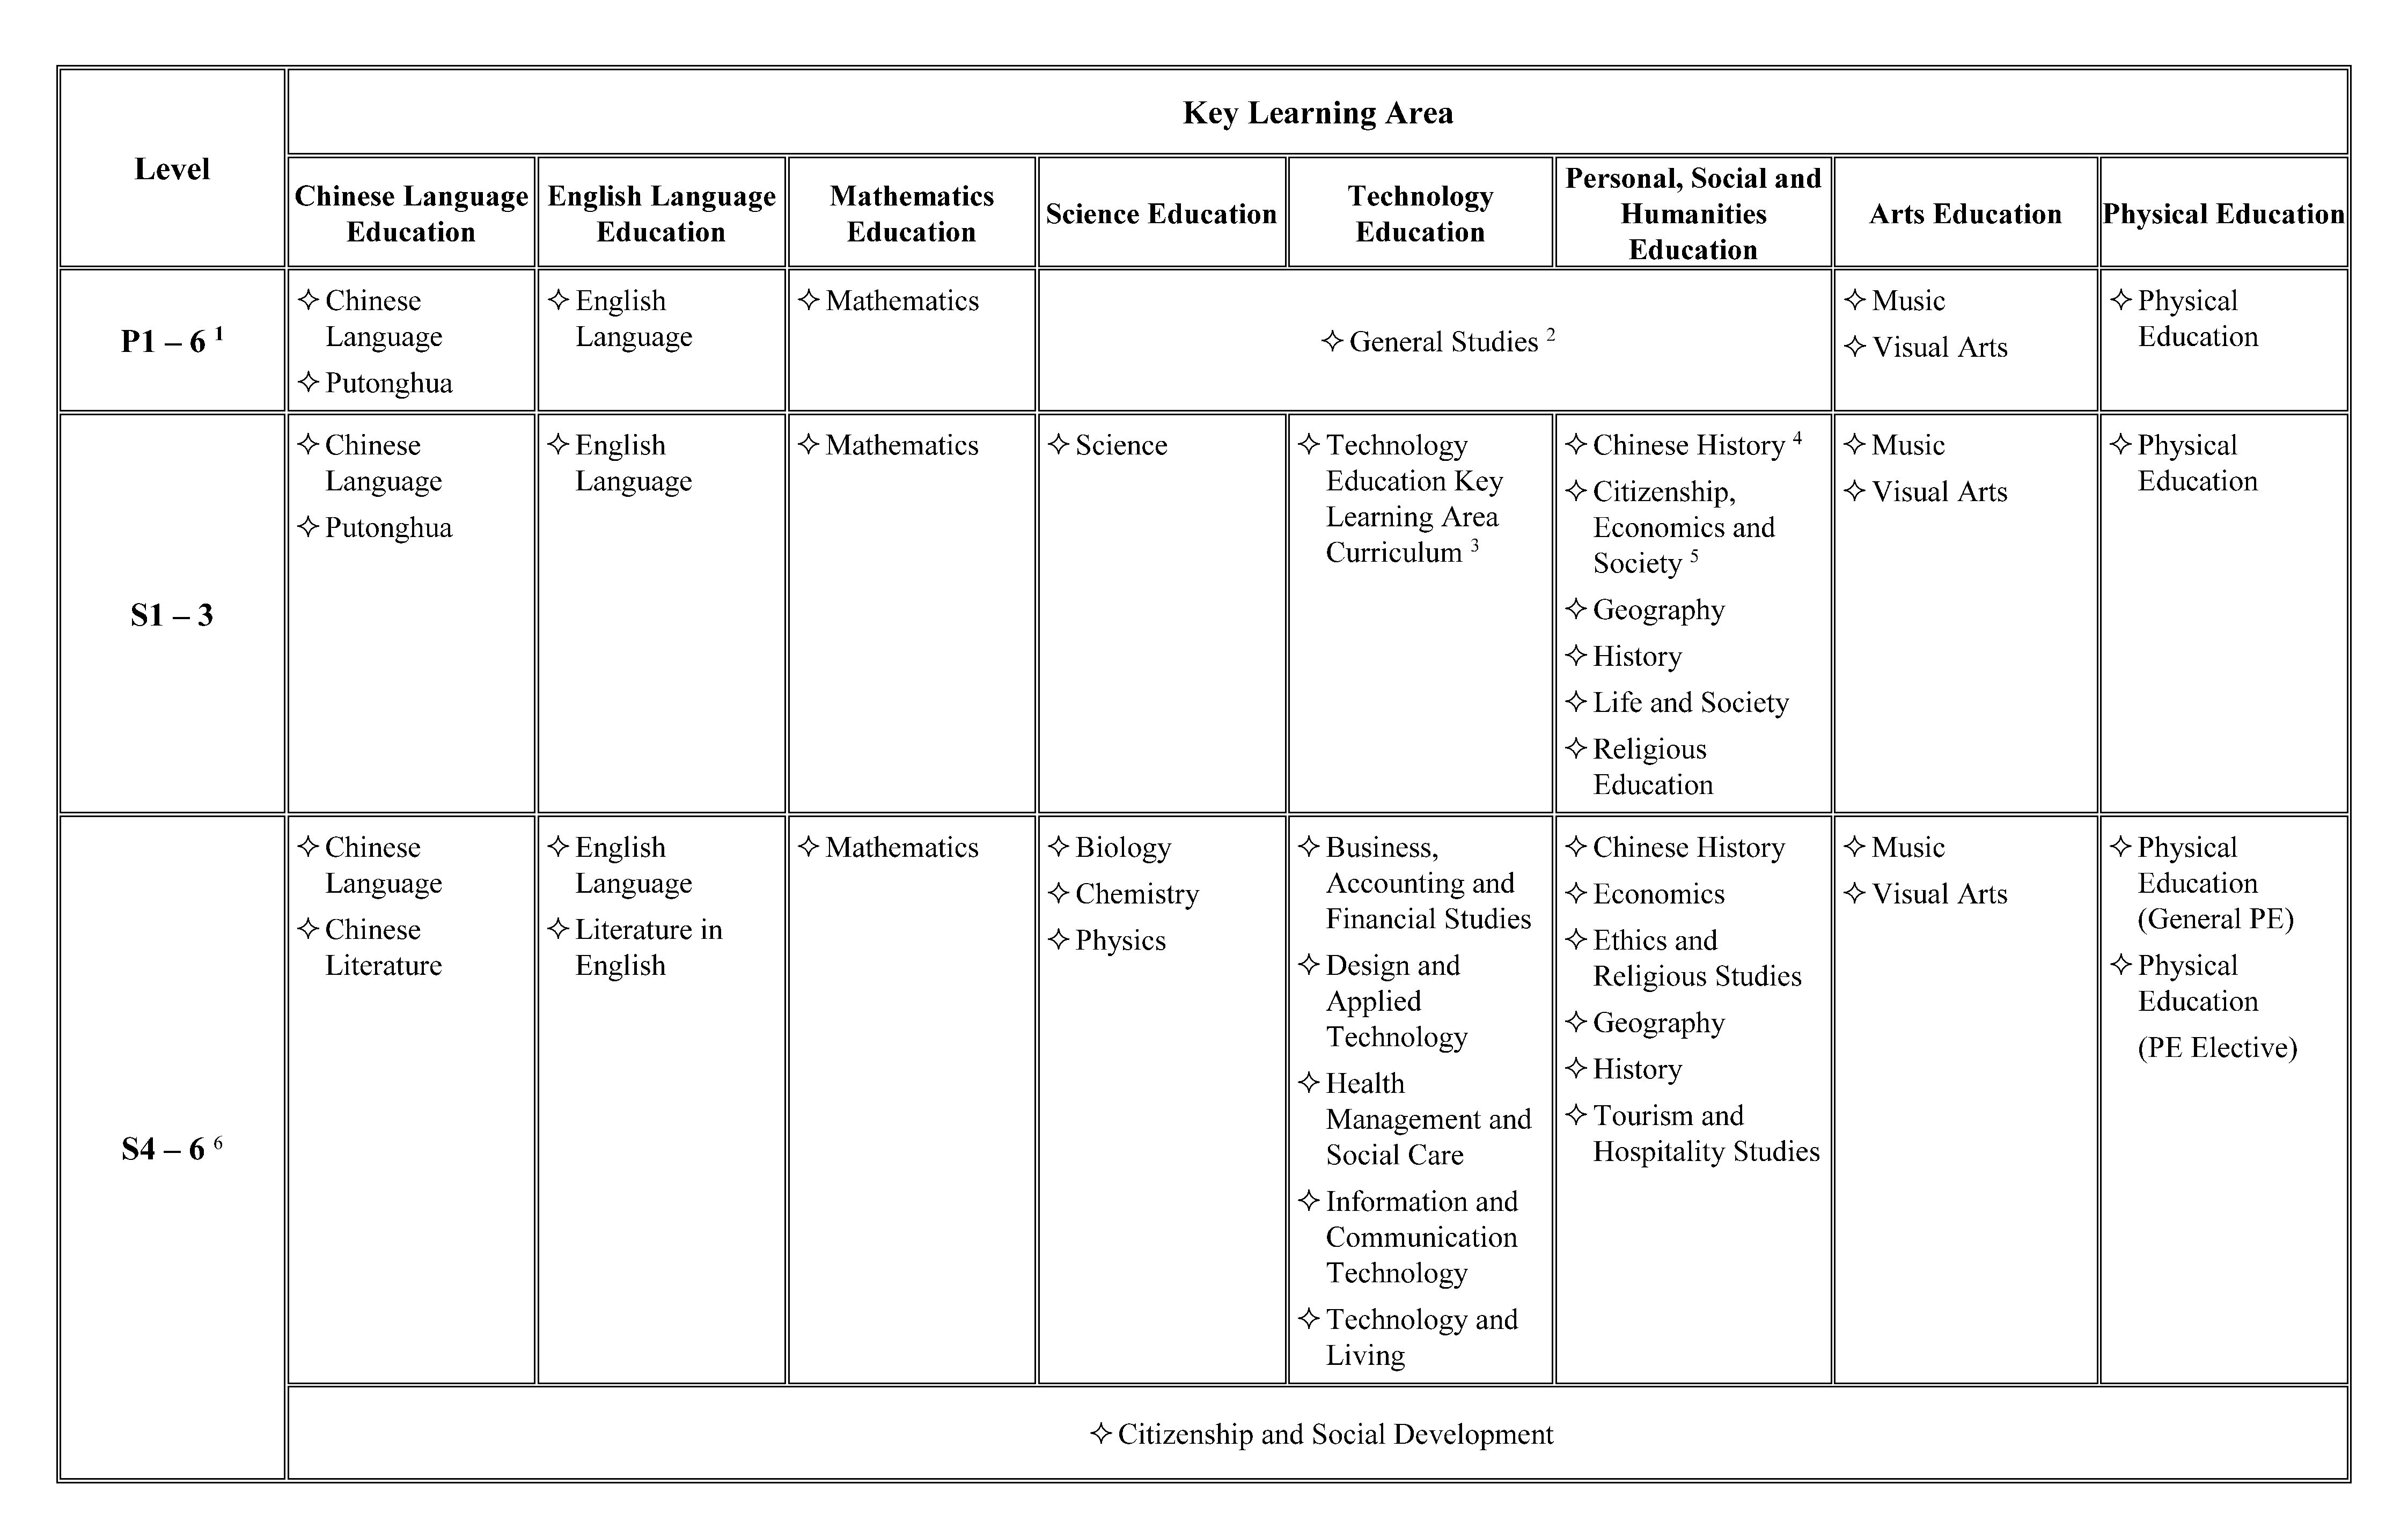 Subjects under the Eight Key Learning Areas